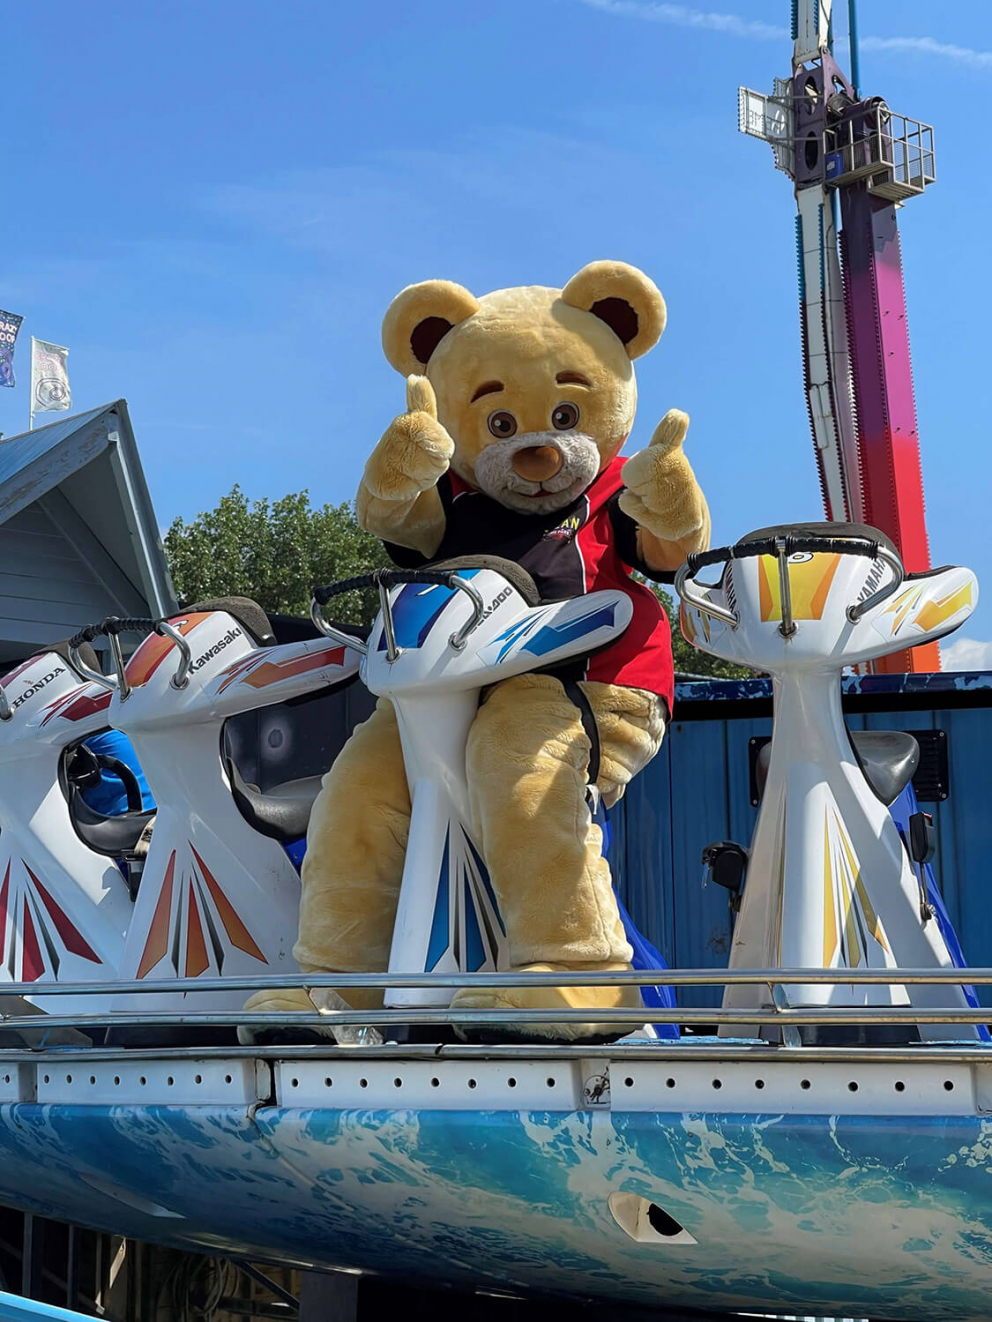 Giant stuffed animals test ride roller coasters while theme parks are closed